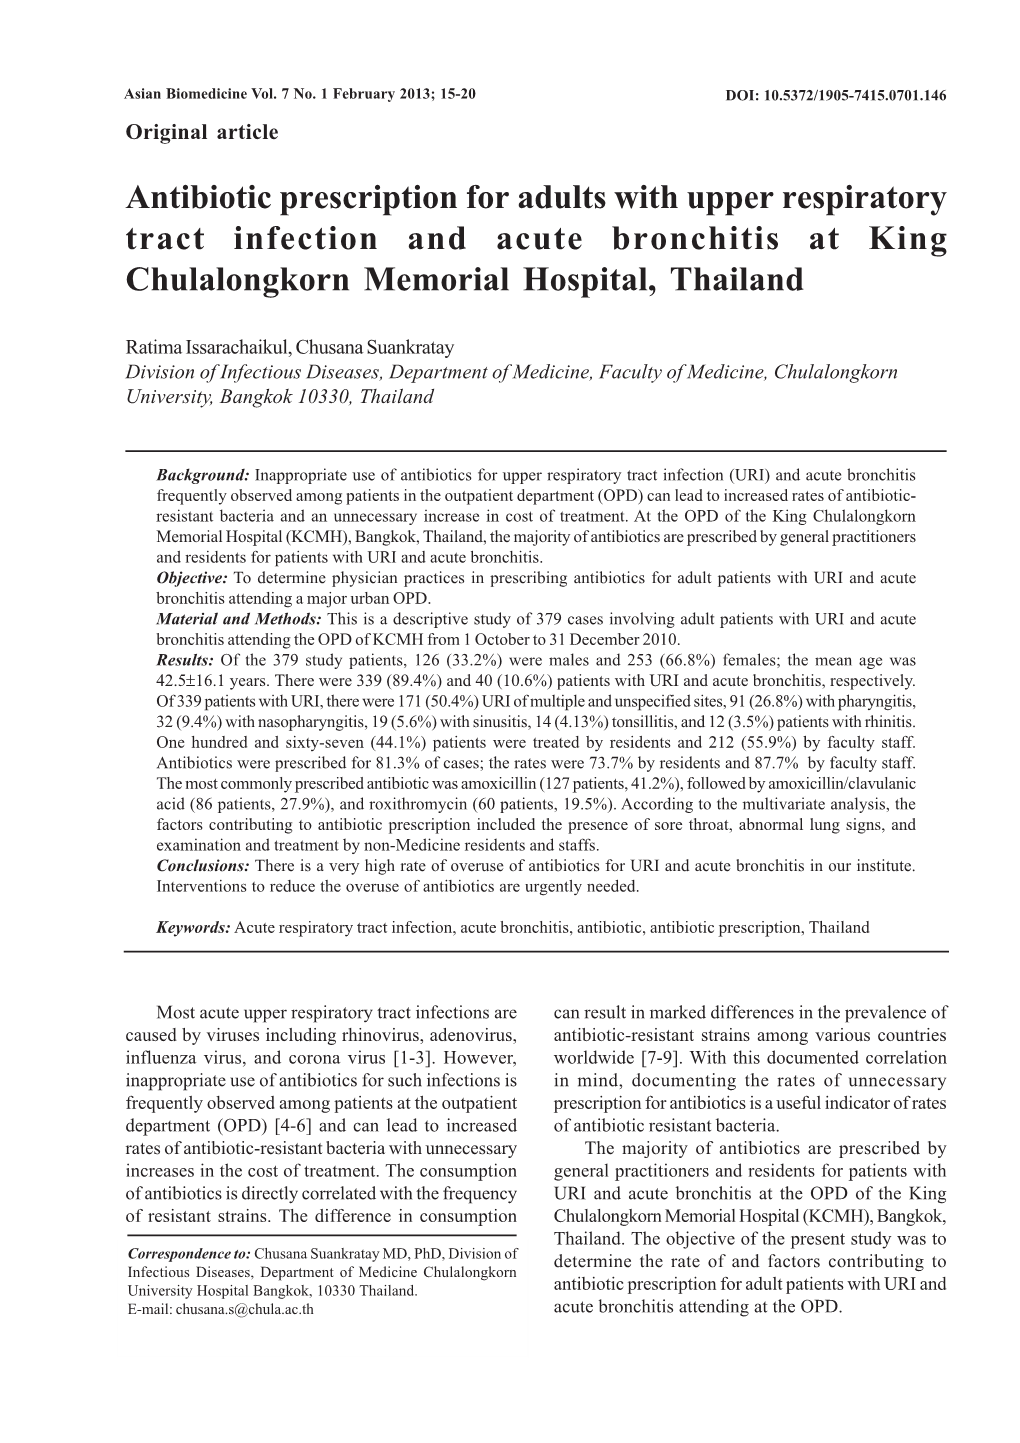 Antibiotic Prescription for Adults with Upper Respiratory Tract Infection and Acute Bronchitis at King Chulalongkorn Memorial Hospital, Thailand